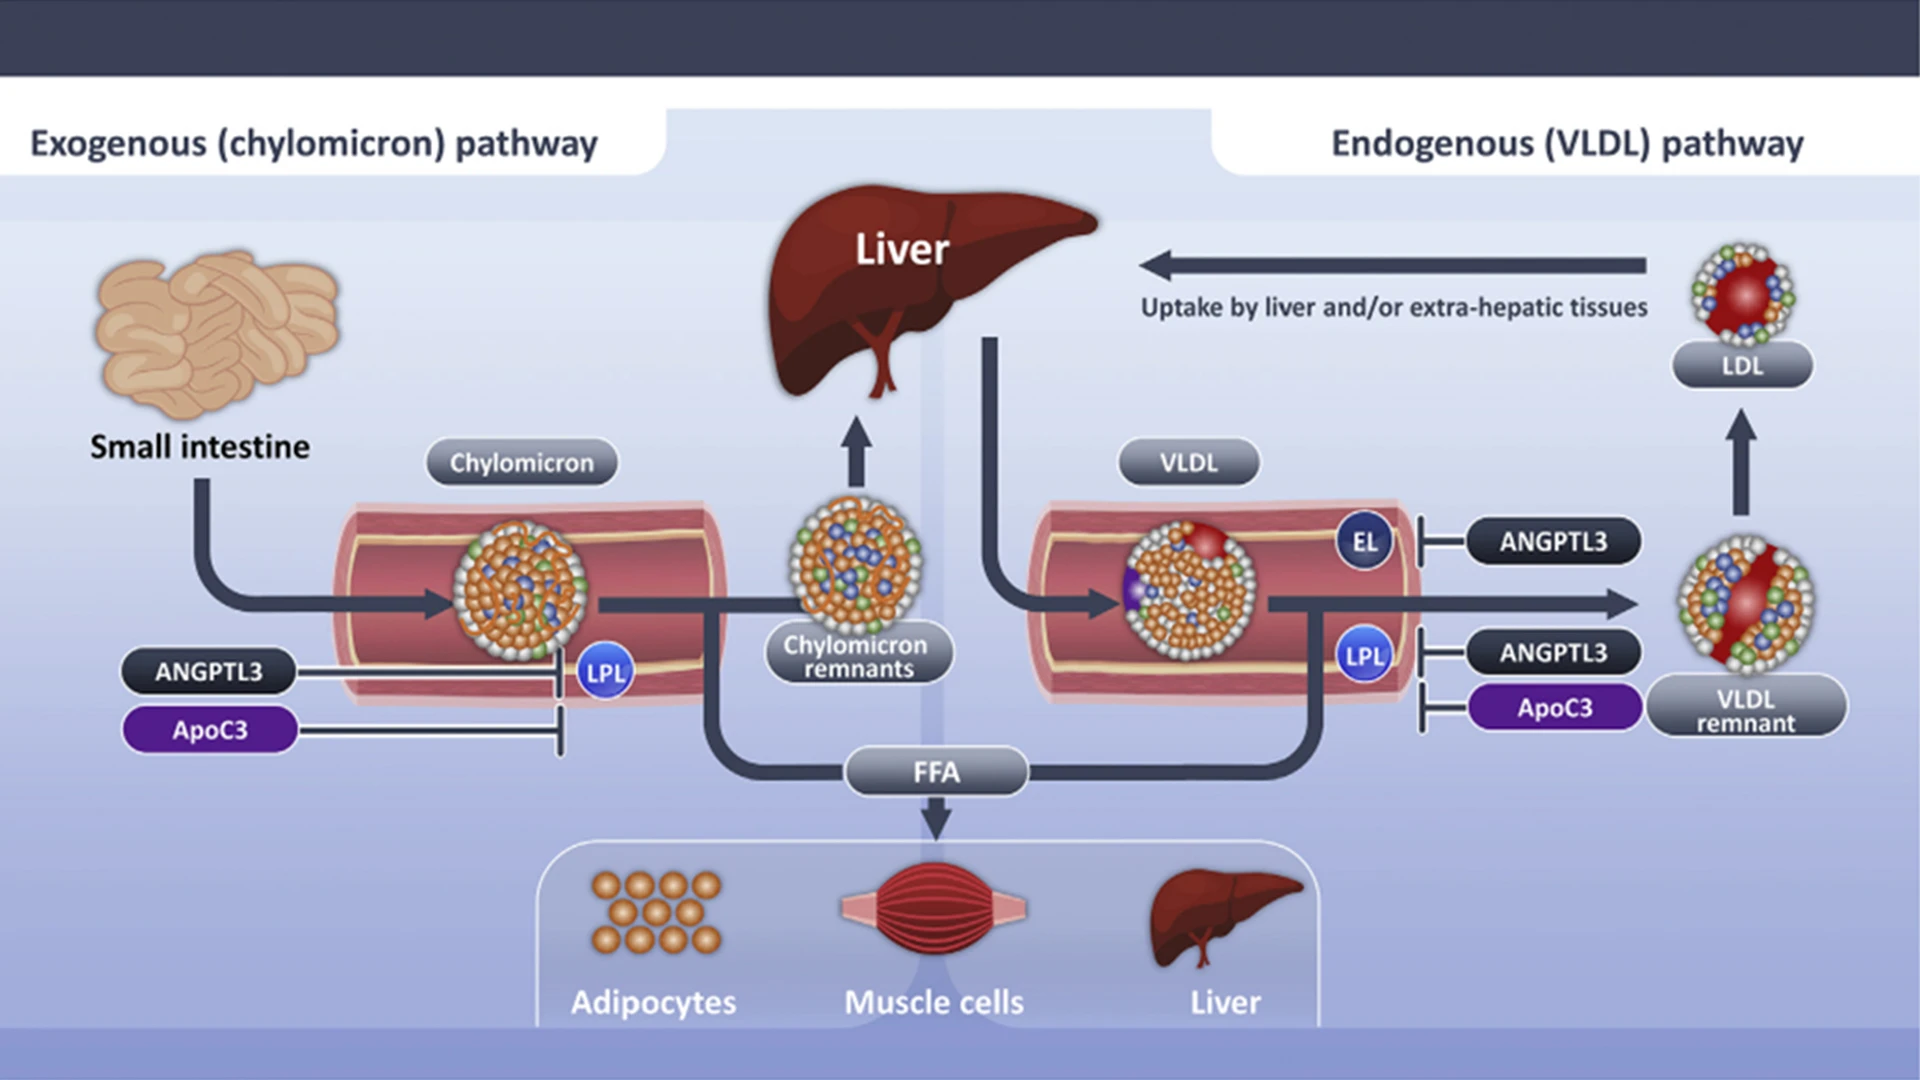  Triglyceride-rich lipoproteins are hydrolyzed by lipoprotein lipase, which elaborates free fatty acids that are used as an energy source by skeletal muscle or stored for future use in the liver or adipocytes. Lipoprotein lipase activity is inhibited by angiopoietin-like 3 protein and apolipoprotein C-III. Delayed clearance of triglyceride-rich lipoproteins fosters formation of a more cholesterol-enriched remnant particle. 